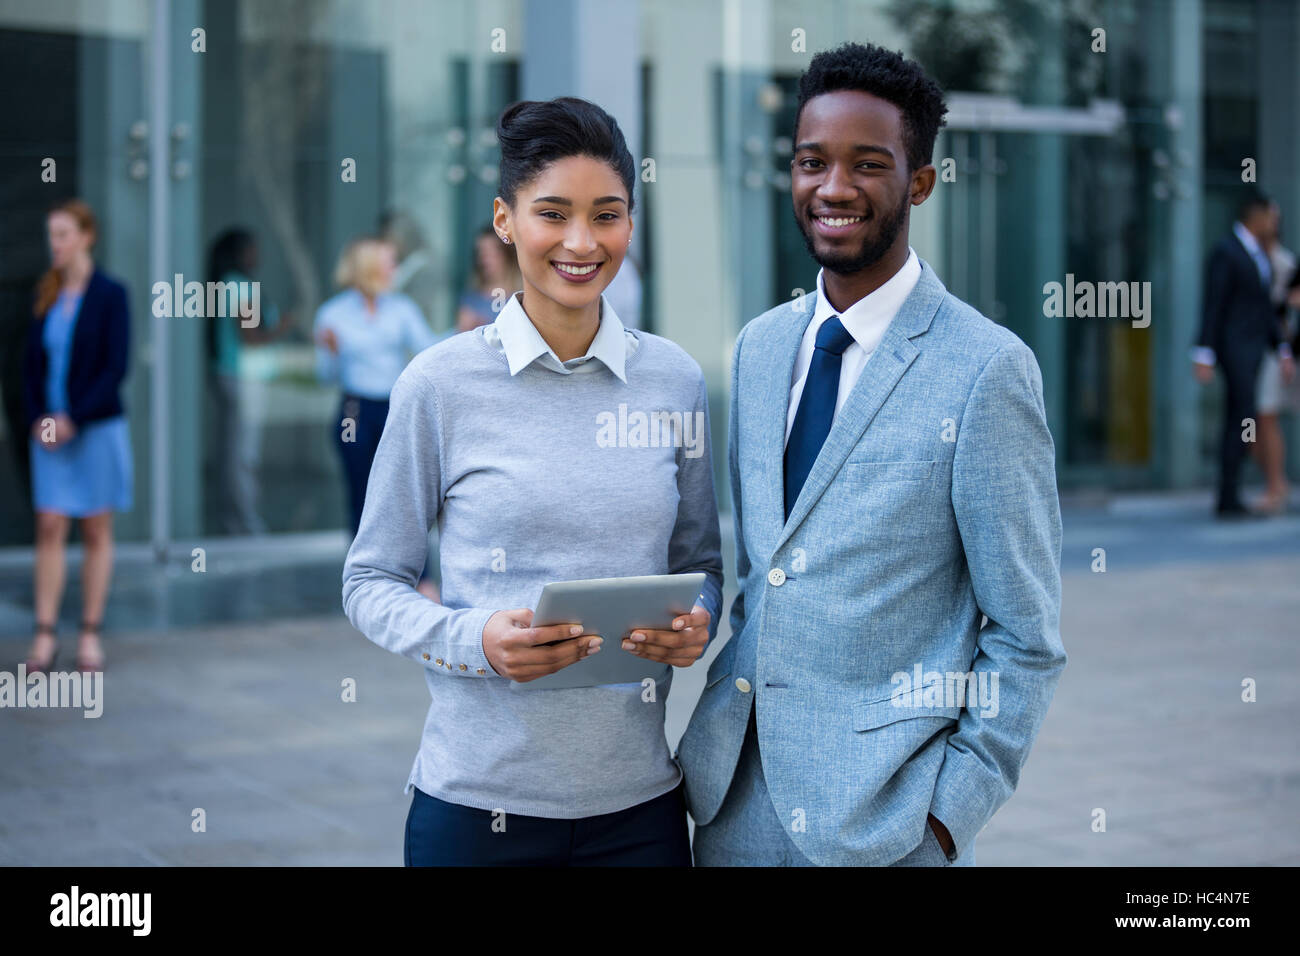 Portrait of businessman and colleague holding digital tablet Stock Photo